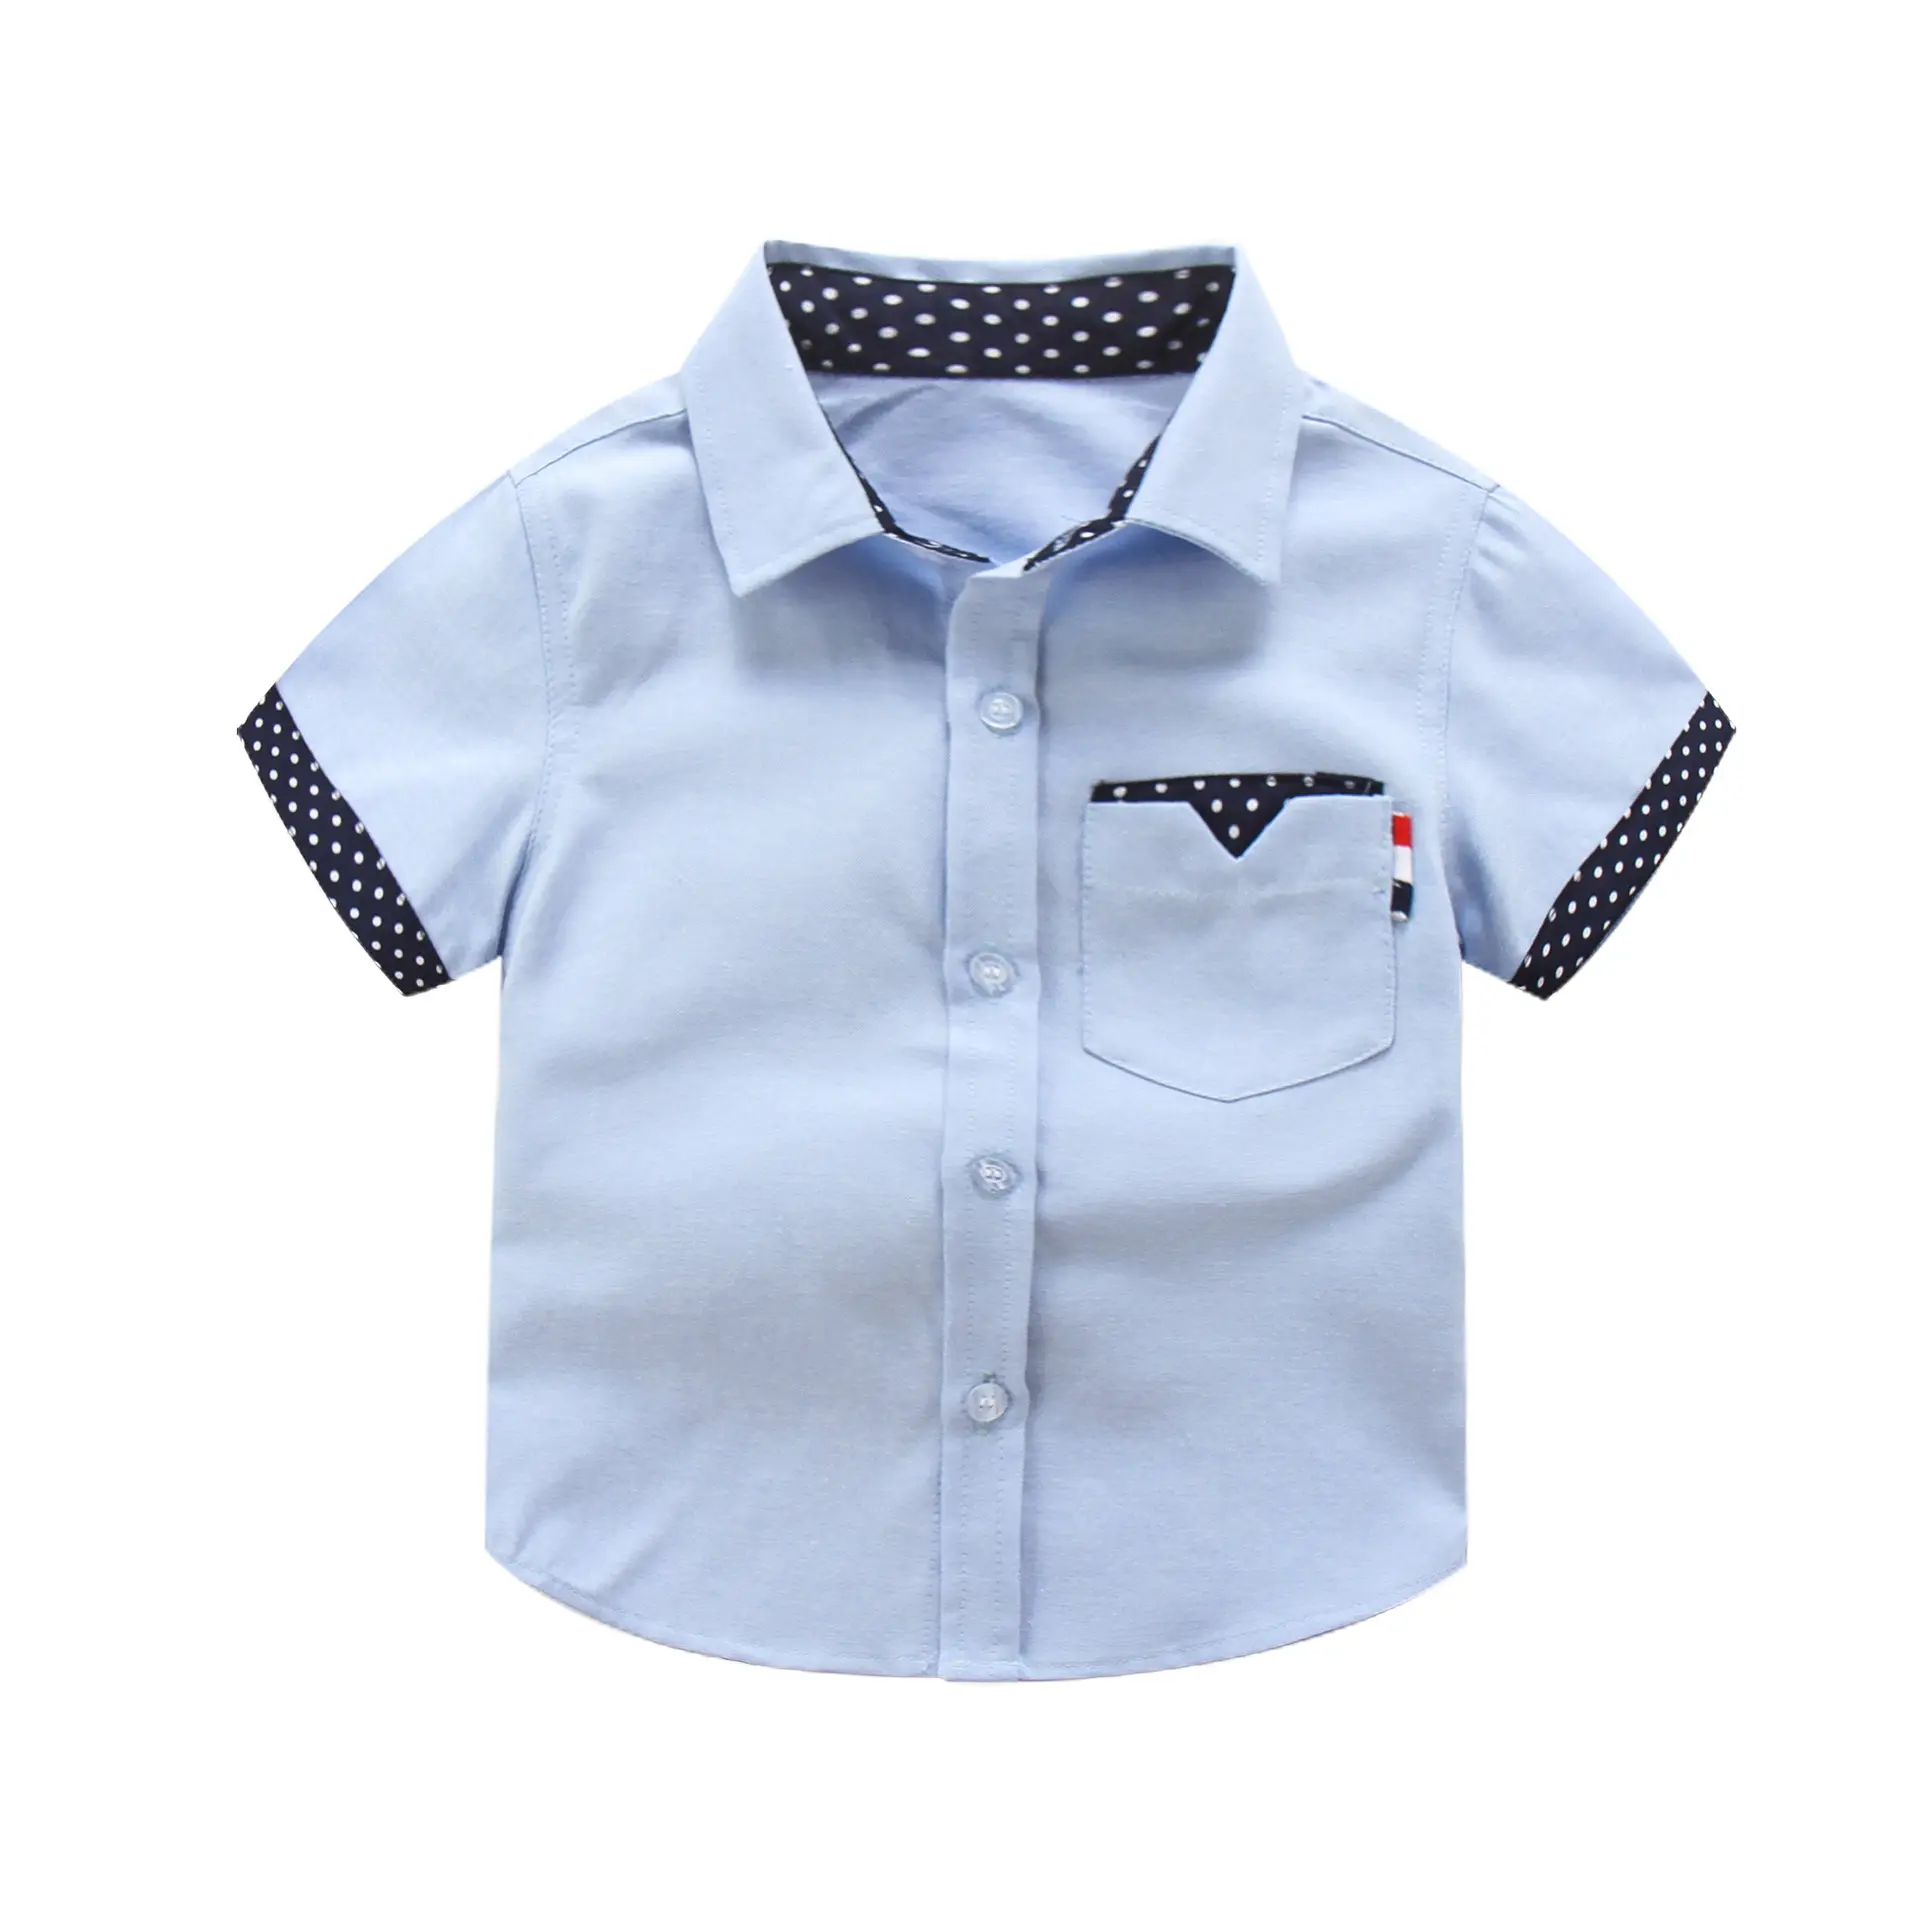 Summer Fashion Kids Boys Gentlemen Shirt Casual Tops Clothes Child Baby Blouse Boy Cotton Short Sleeves Top T-shirt Clothing